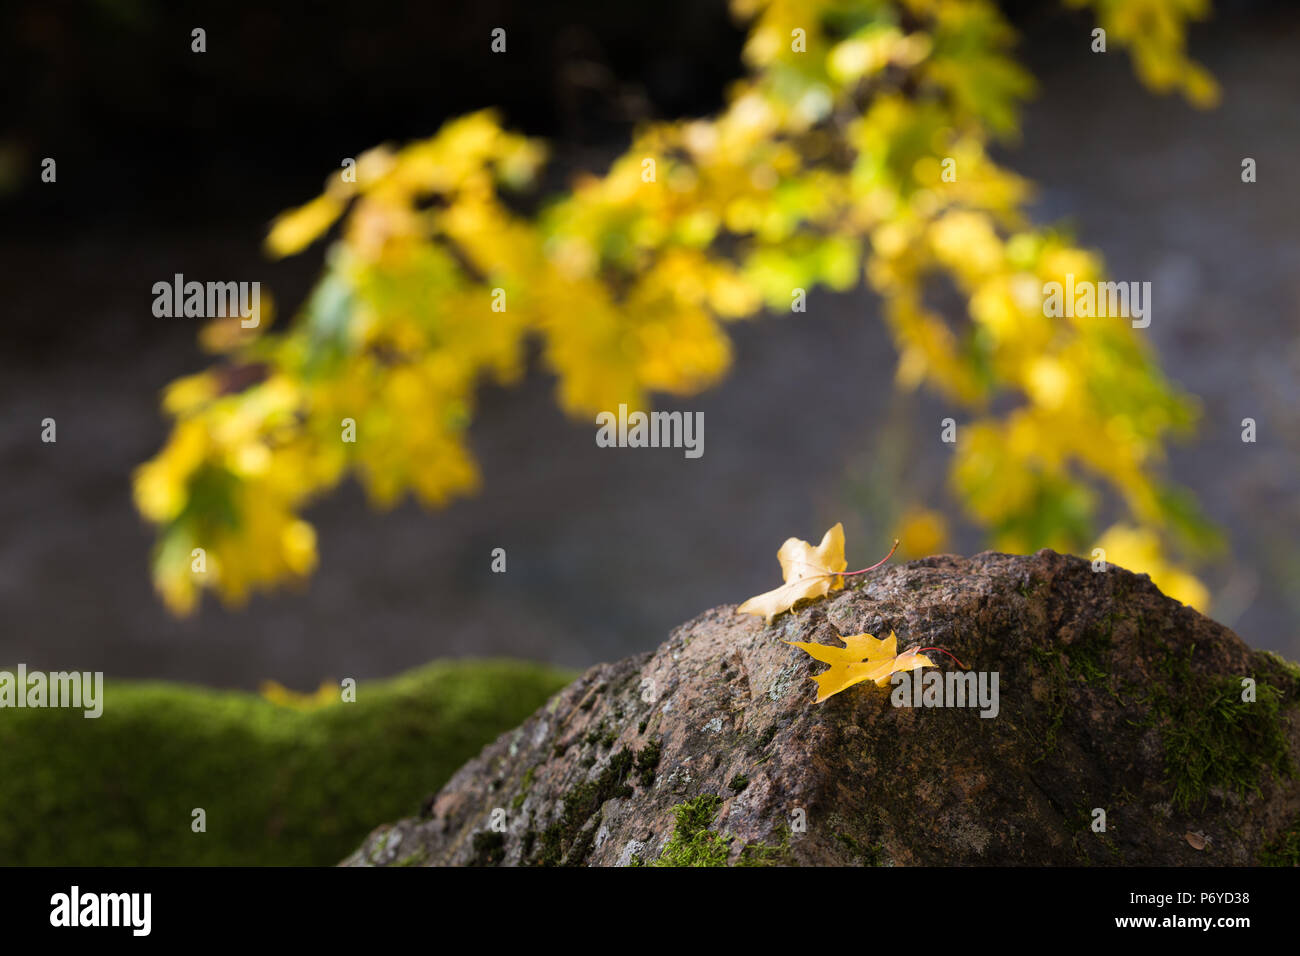 Two yellow maple leaves on gray rock in front of branch of vibrant yellow maple leaves Stock Photo